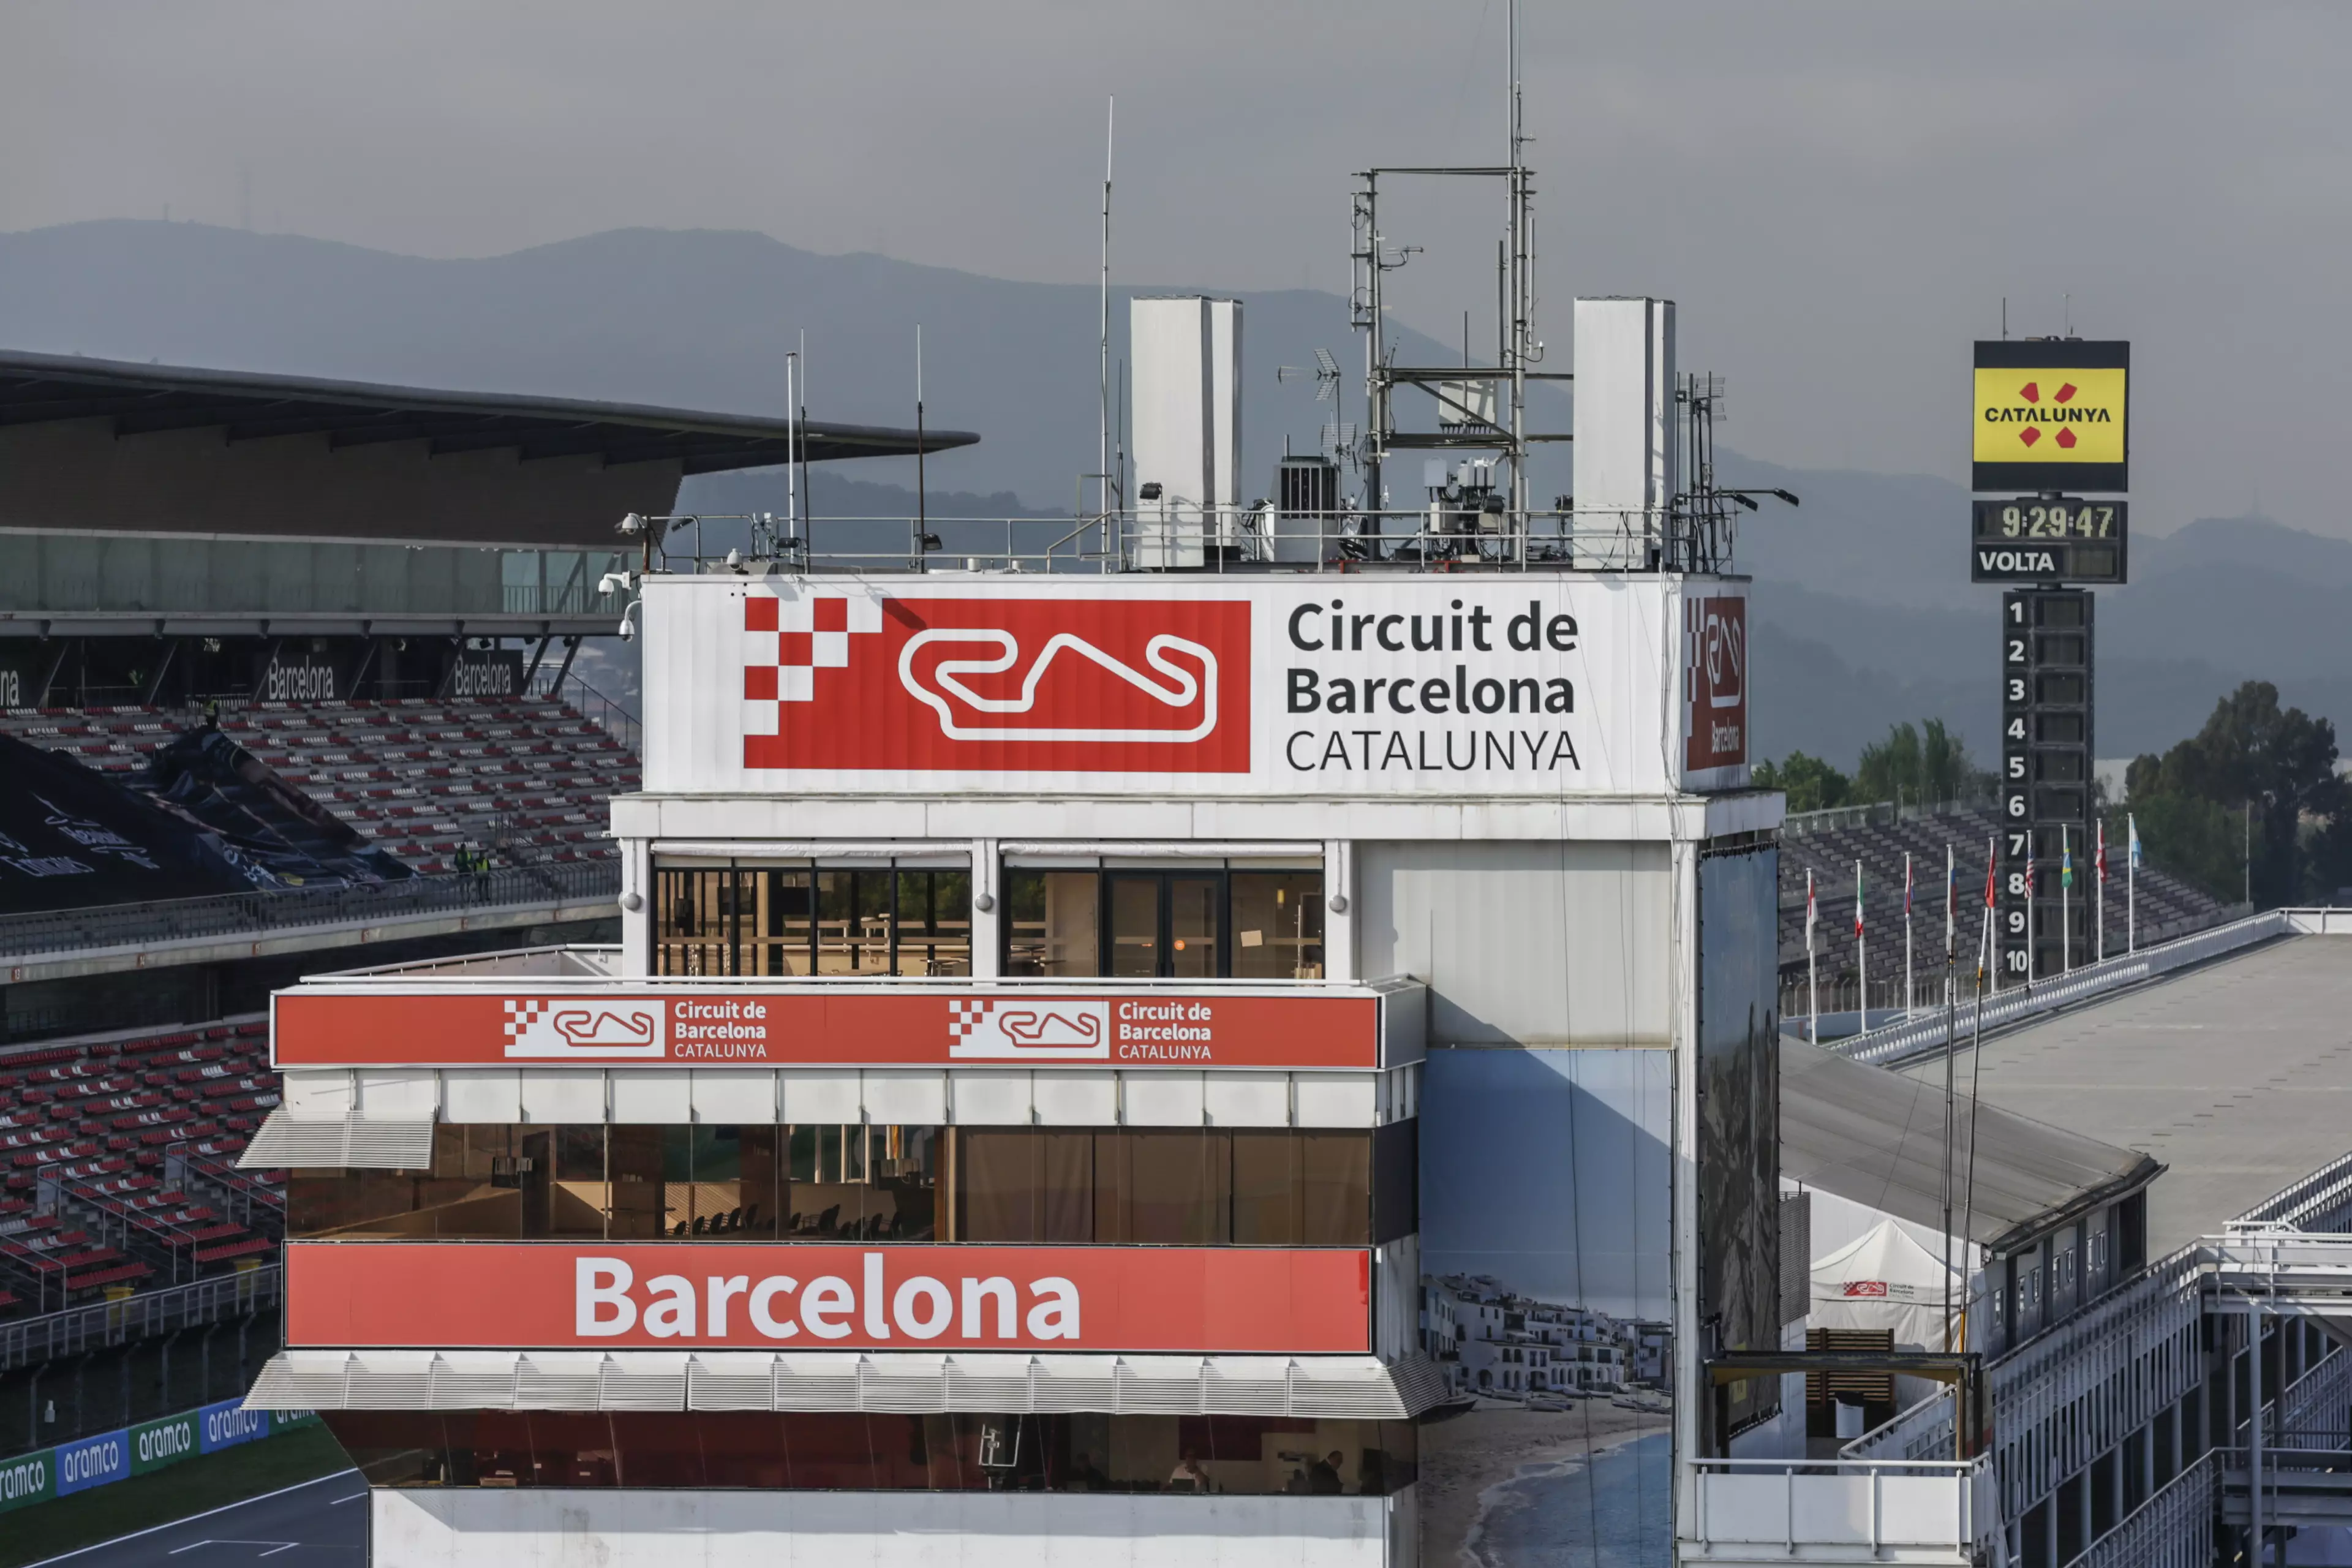 The first Spanish Grand Prix at the Circuit de Barcelona-Catalunya was held back in 1991